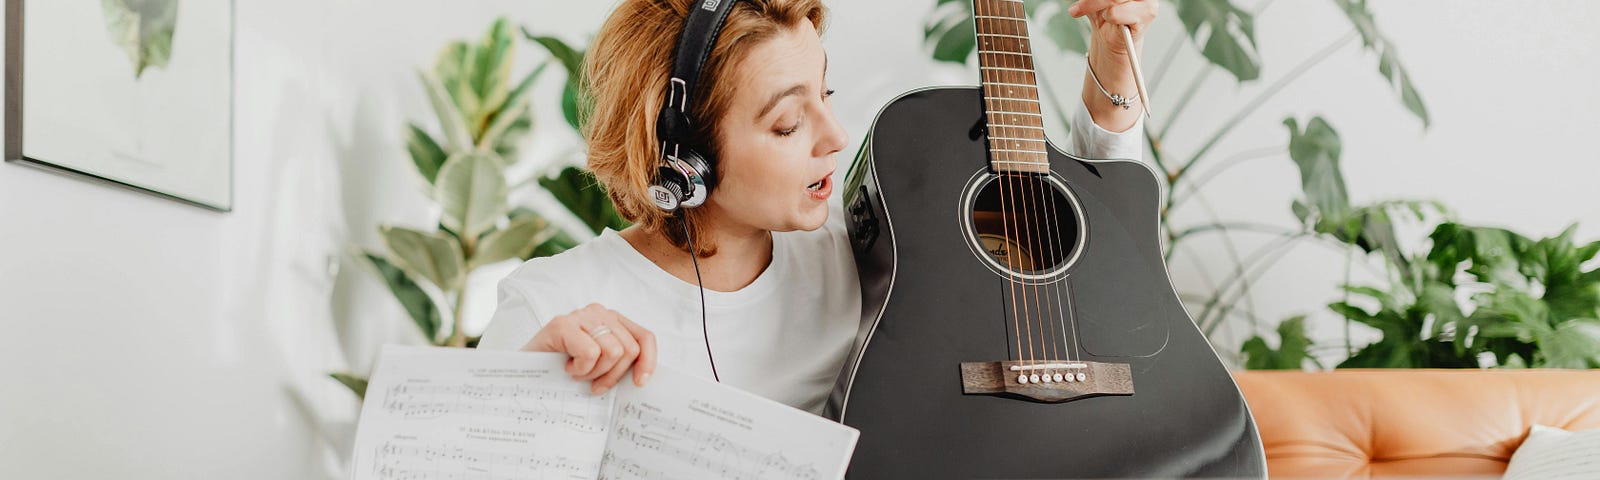 Woman Playing Guitar on Video Call on Computer. She is wearing a headset. She is pointing at the strings and has some sheet music in her right hand.